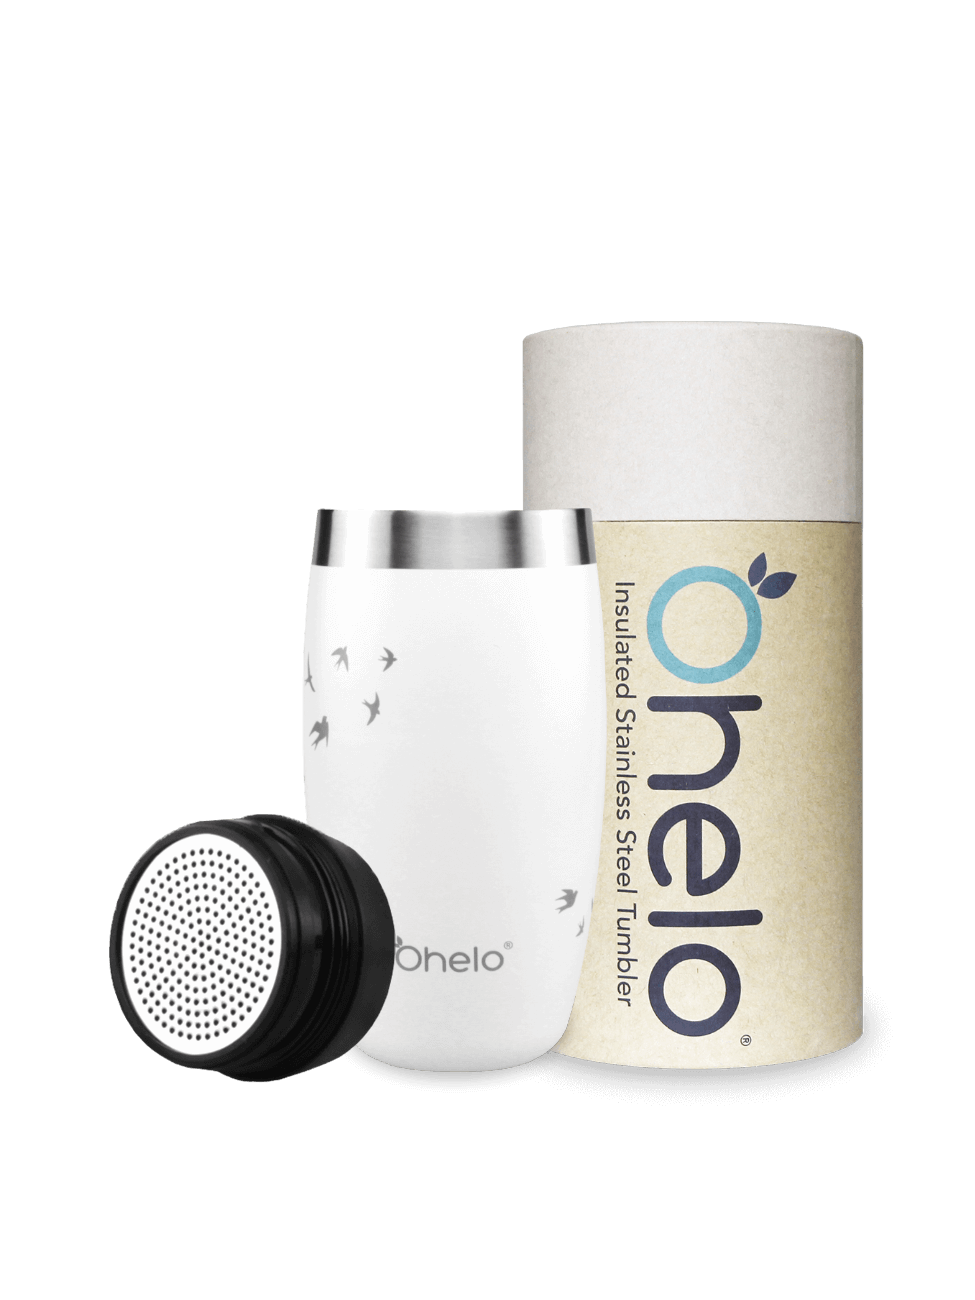 Ohelo BPA free insulated tumbler in white with swallow bird design with recycled packaging